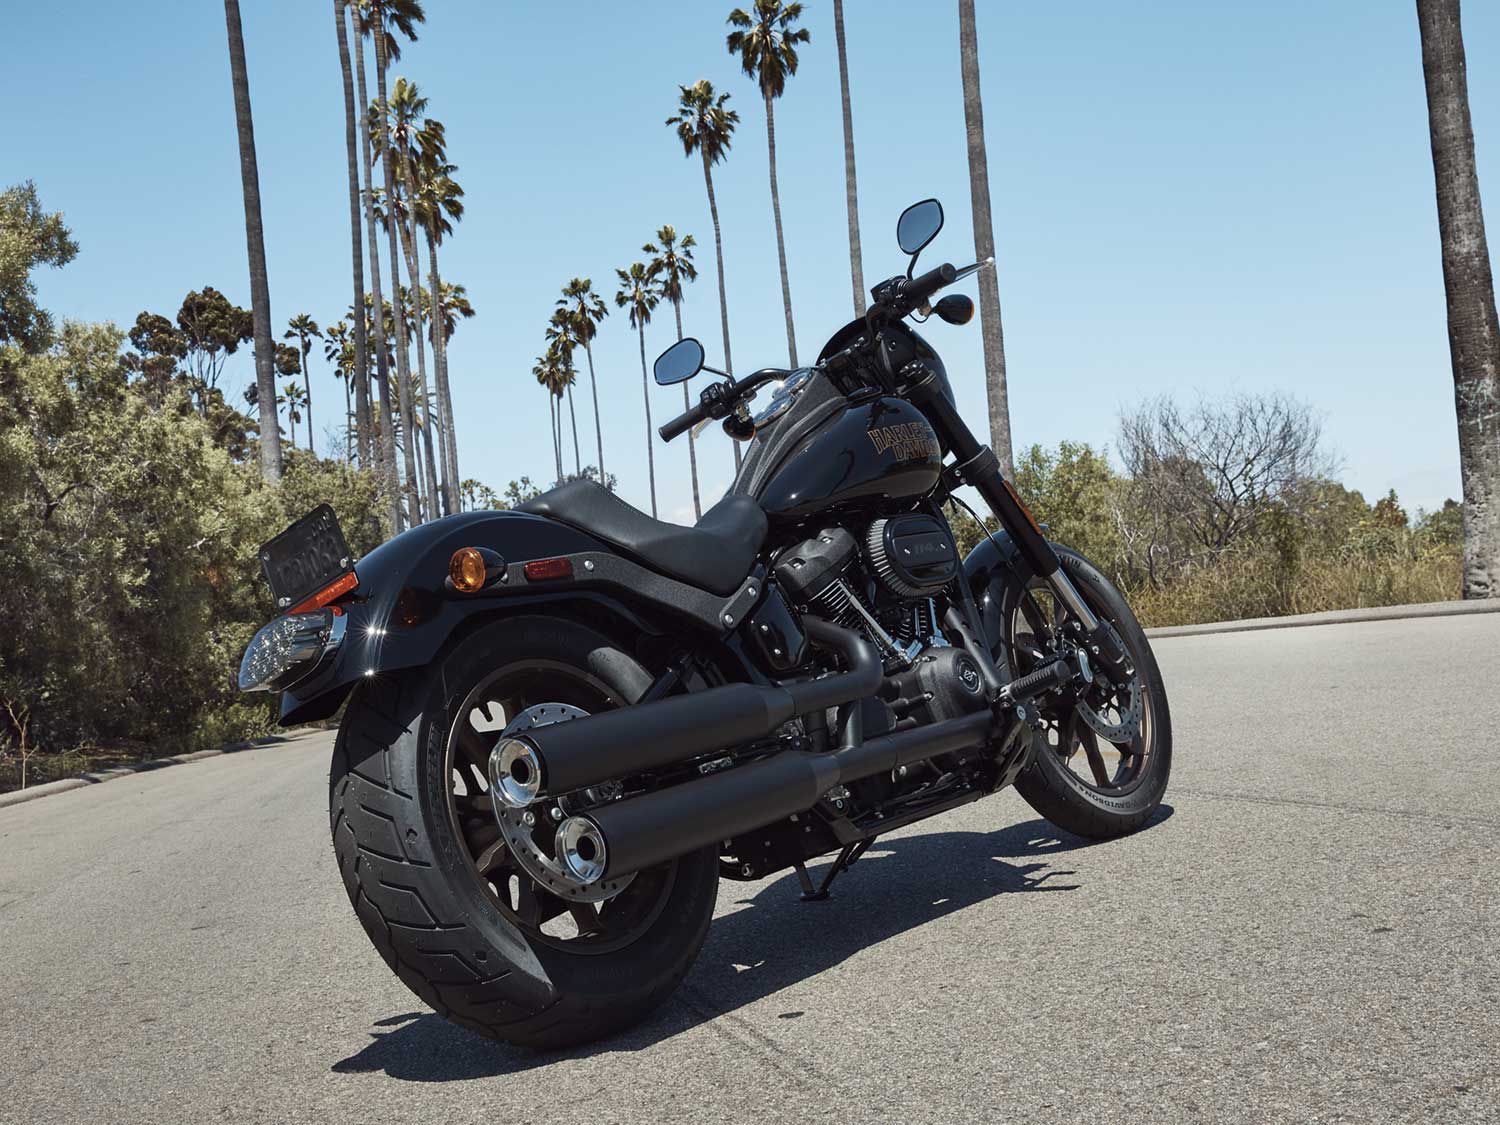 The Harley Davidson Low Rider S Is Back Motorcycle Cruiser